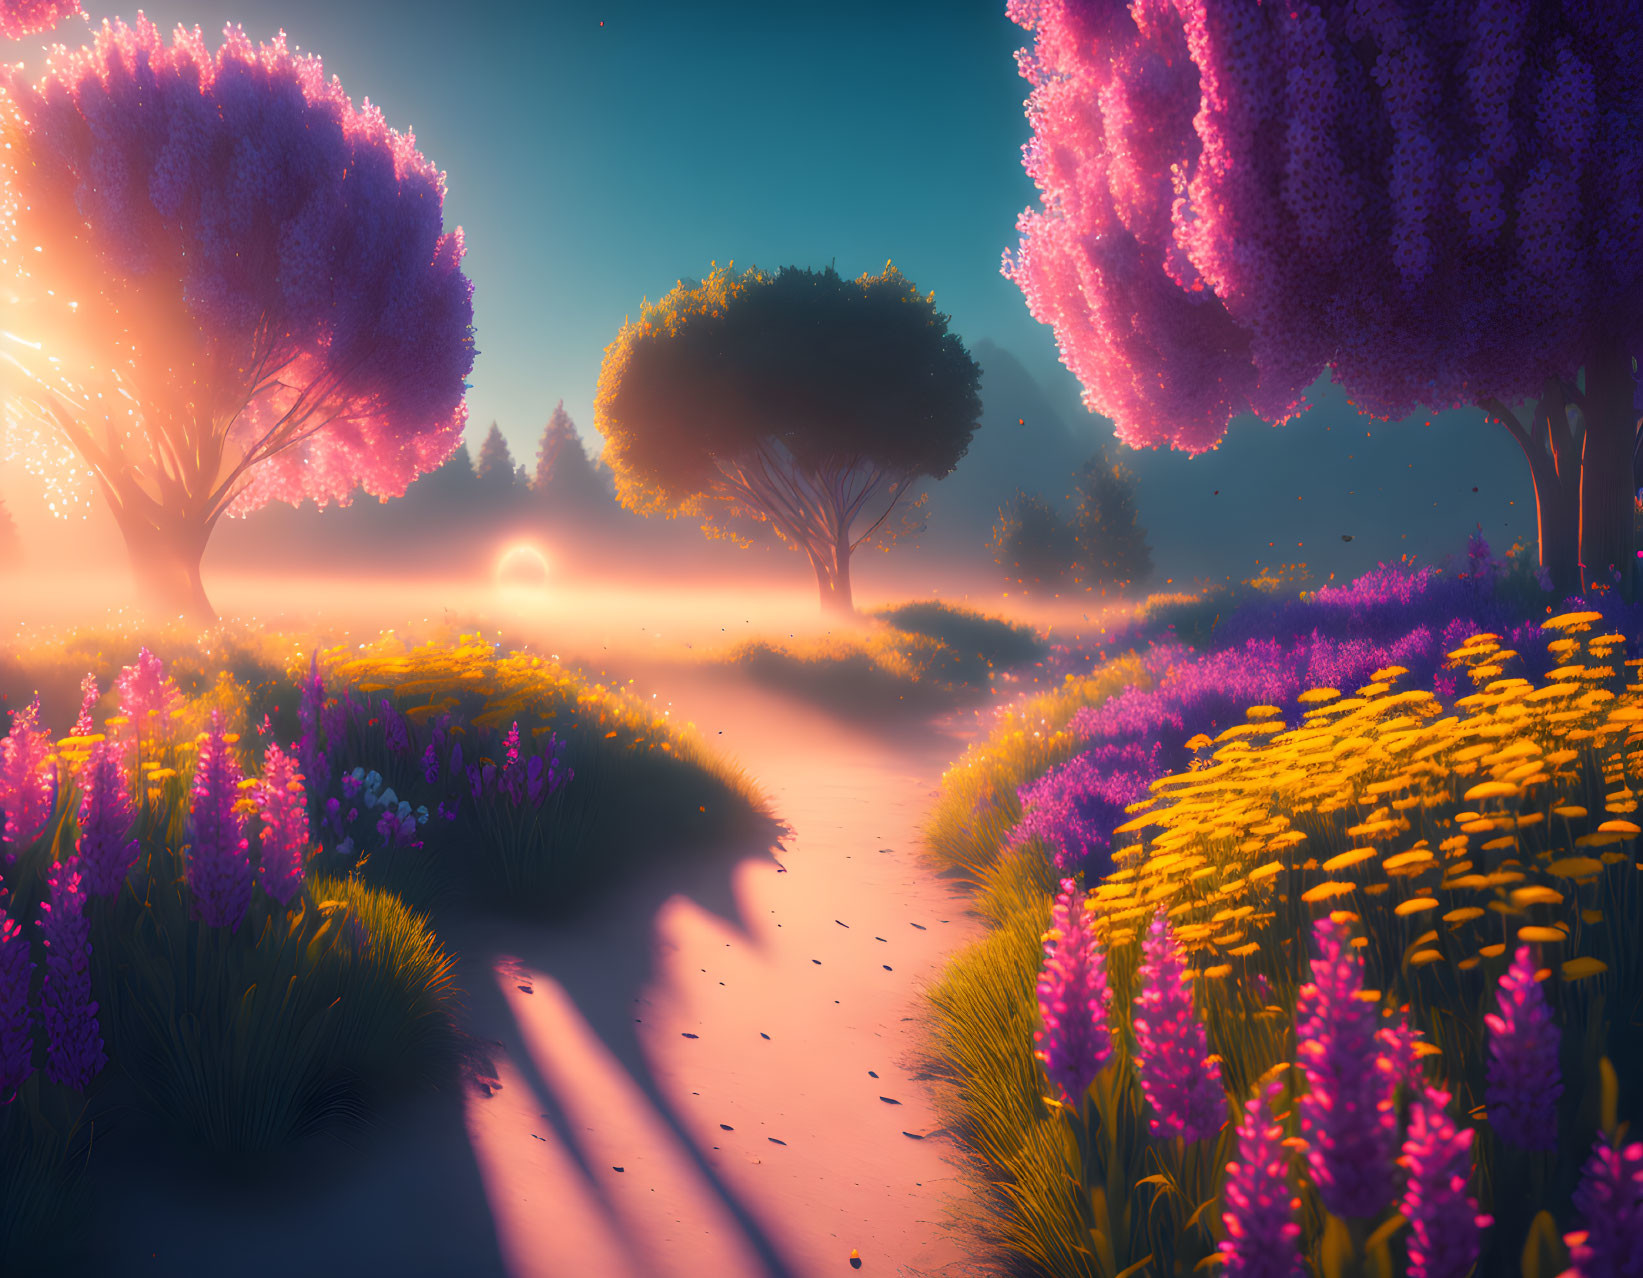 Vibrant purple trees in dreamy sunset landscape with whimsical path